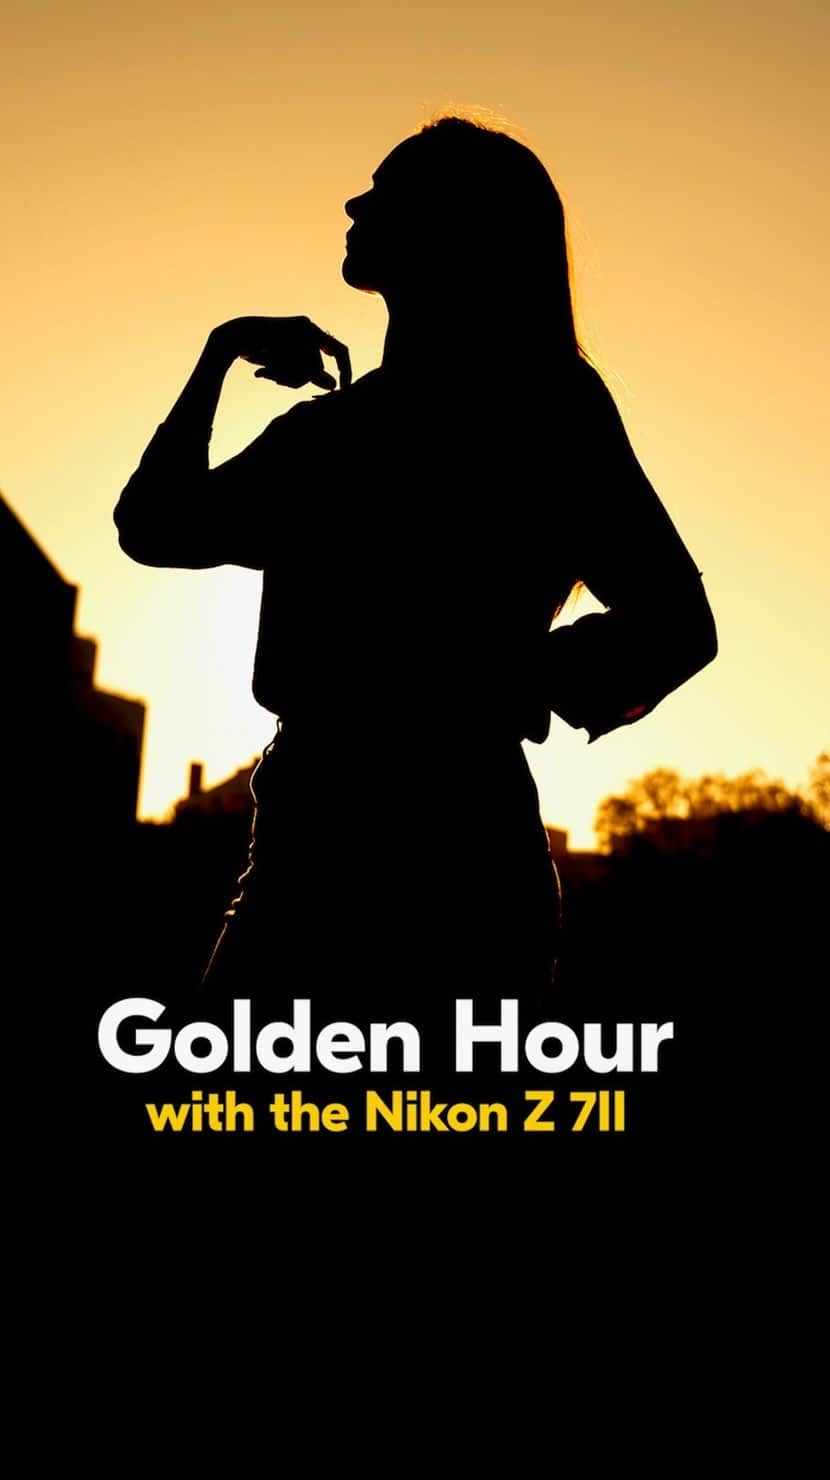 NikonUSAのインスタグラム：「Golden hour is the vibe ✨ Save these 5 tips to try for your own dreamy photos – from a glowing backlight portrait to silhouettes. Give this a shot during your next shoot, then tag us in your best golden hour photos & videos with #NikonCreators to be featured!   #Nikon #Z7II #GoldenHour #MagicHour #Photography #PortraitPhotography」